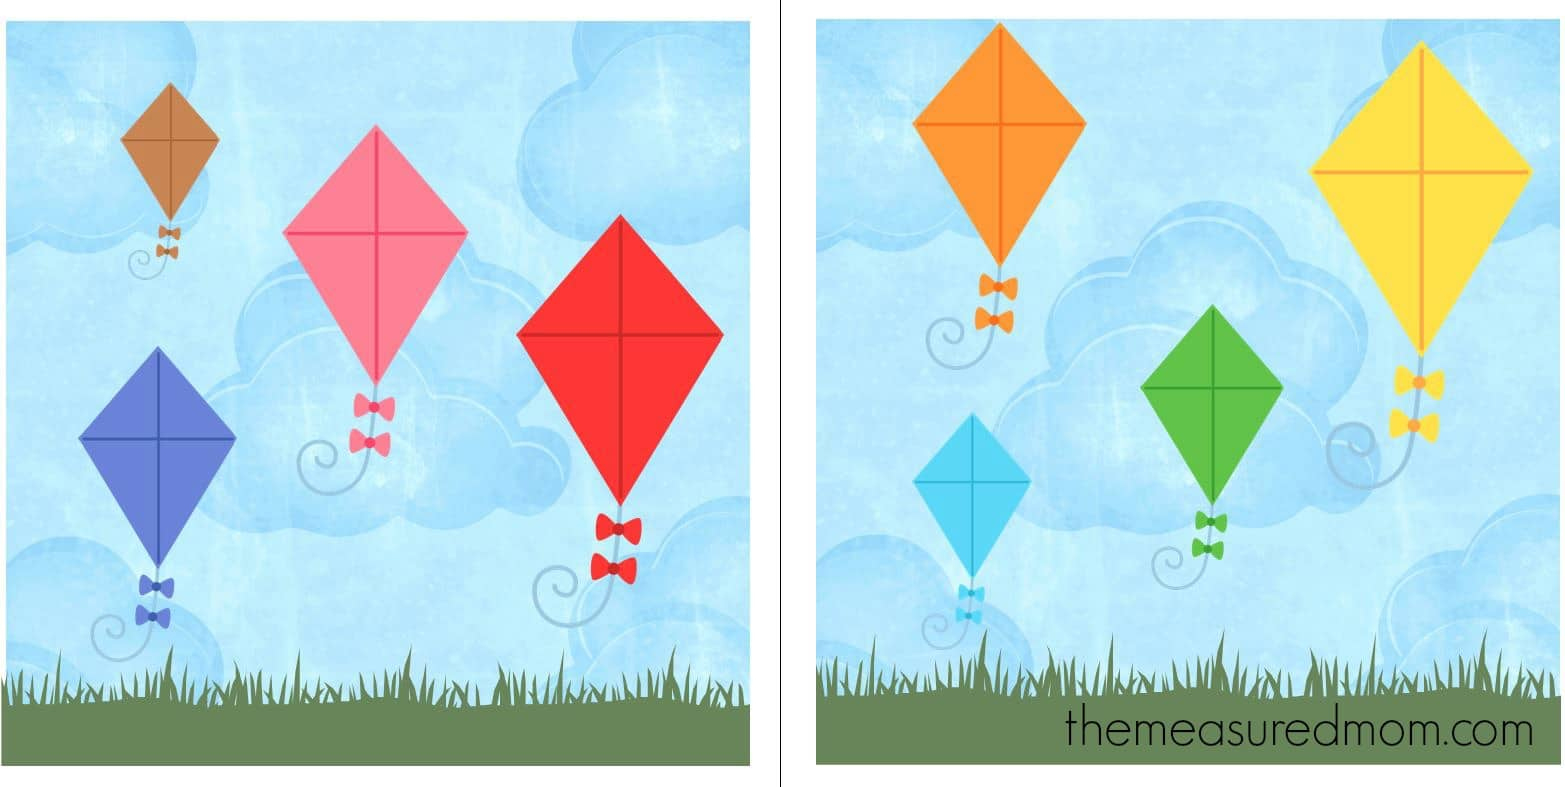 Free File Folder Game For Preschoolers: Kites! - The Measured Mom within File Folder Games For Toddlers Free Printable